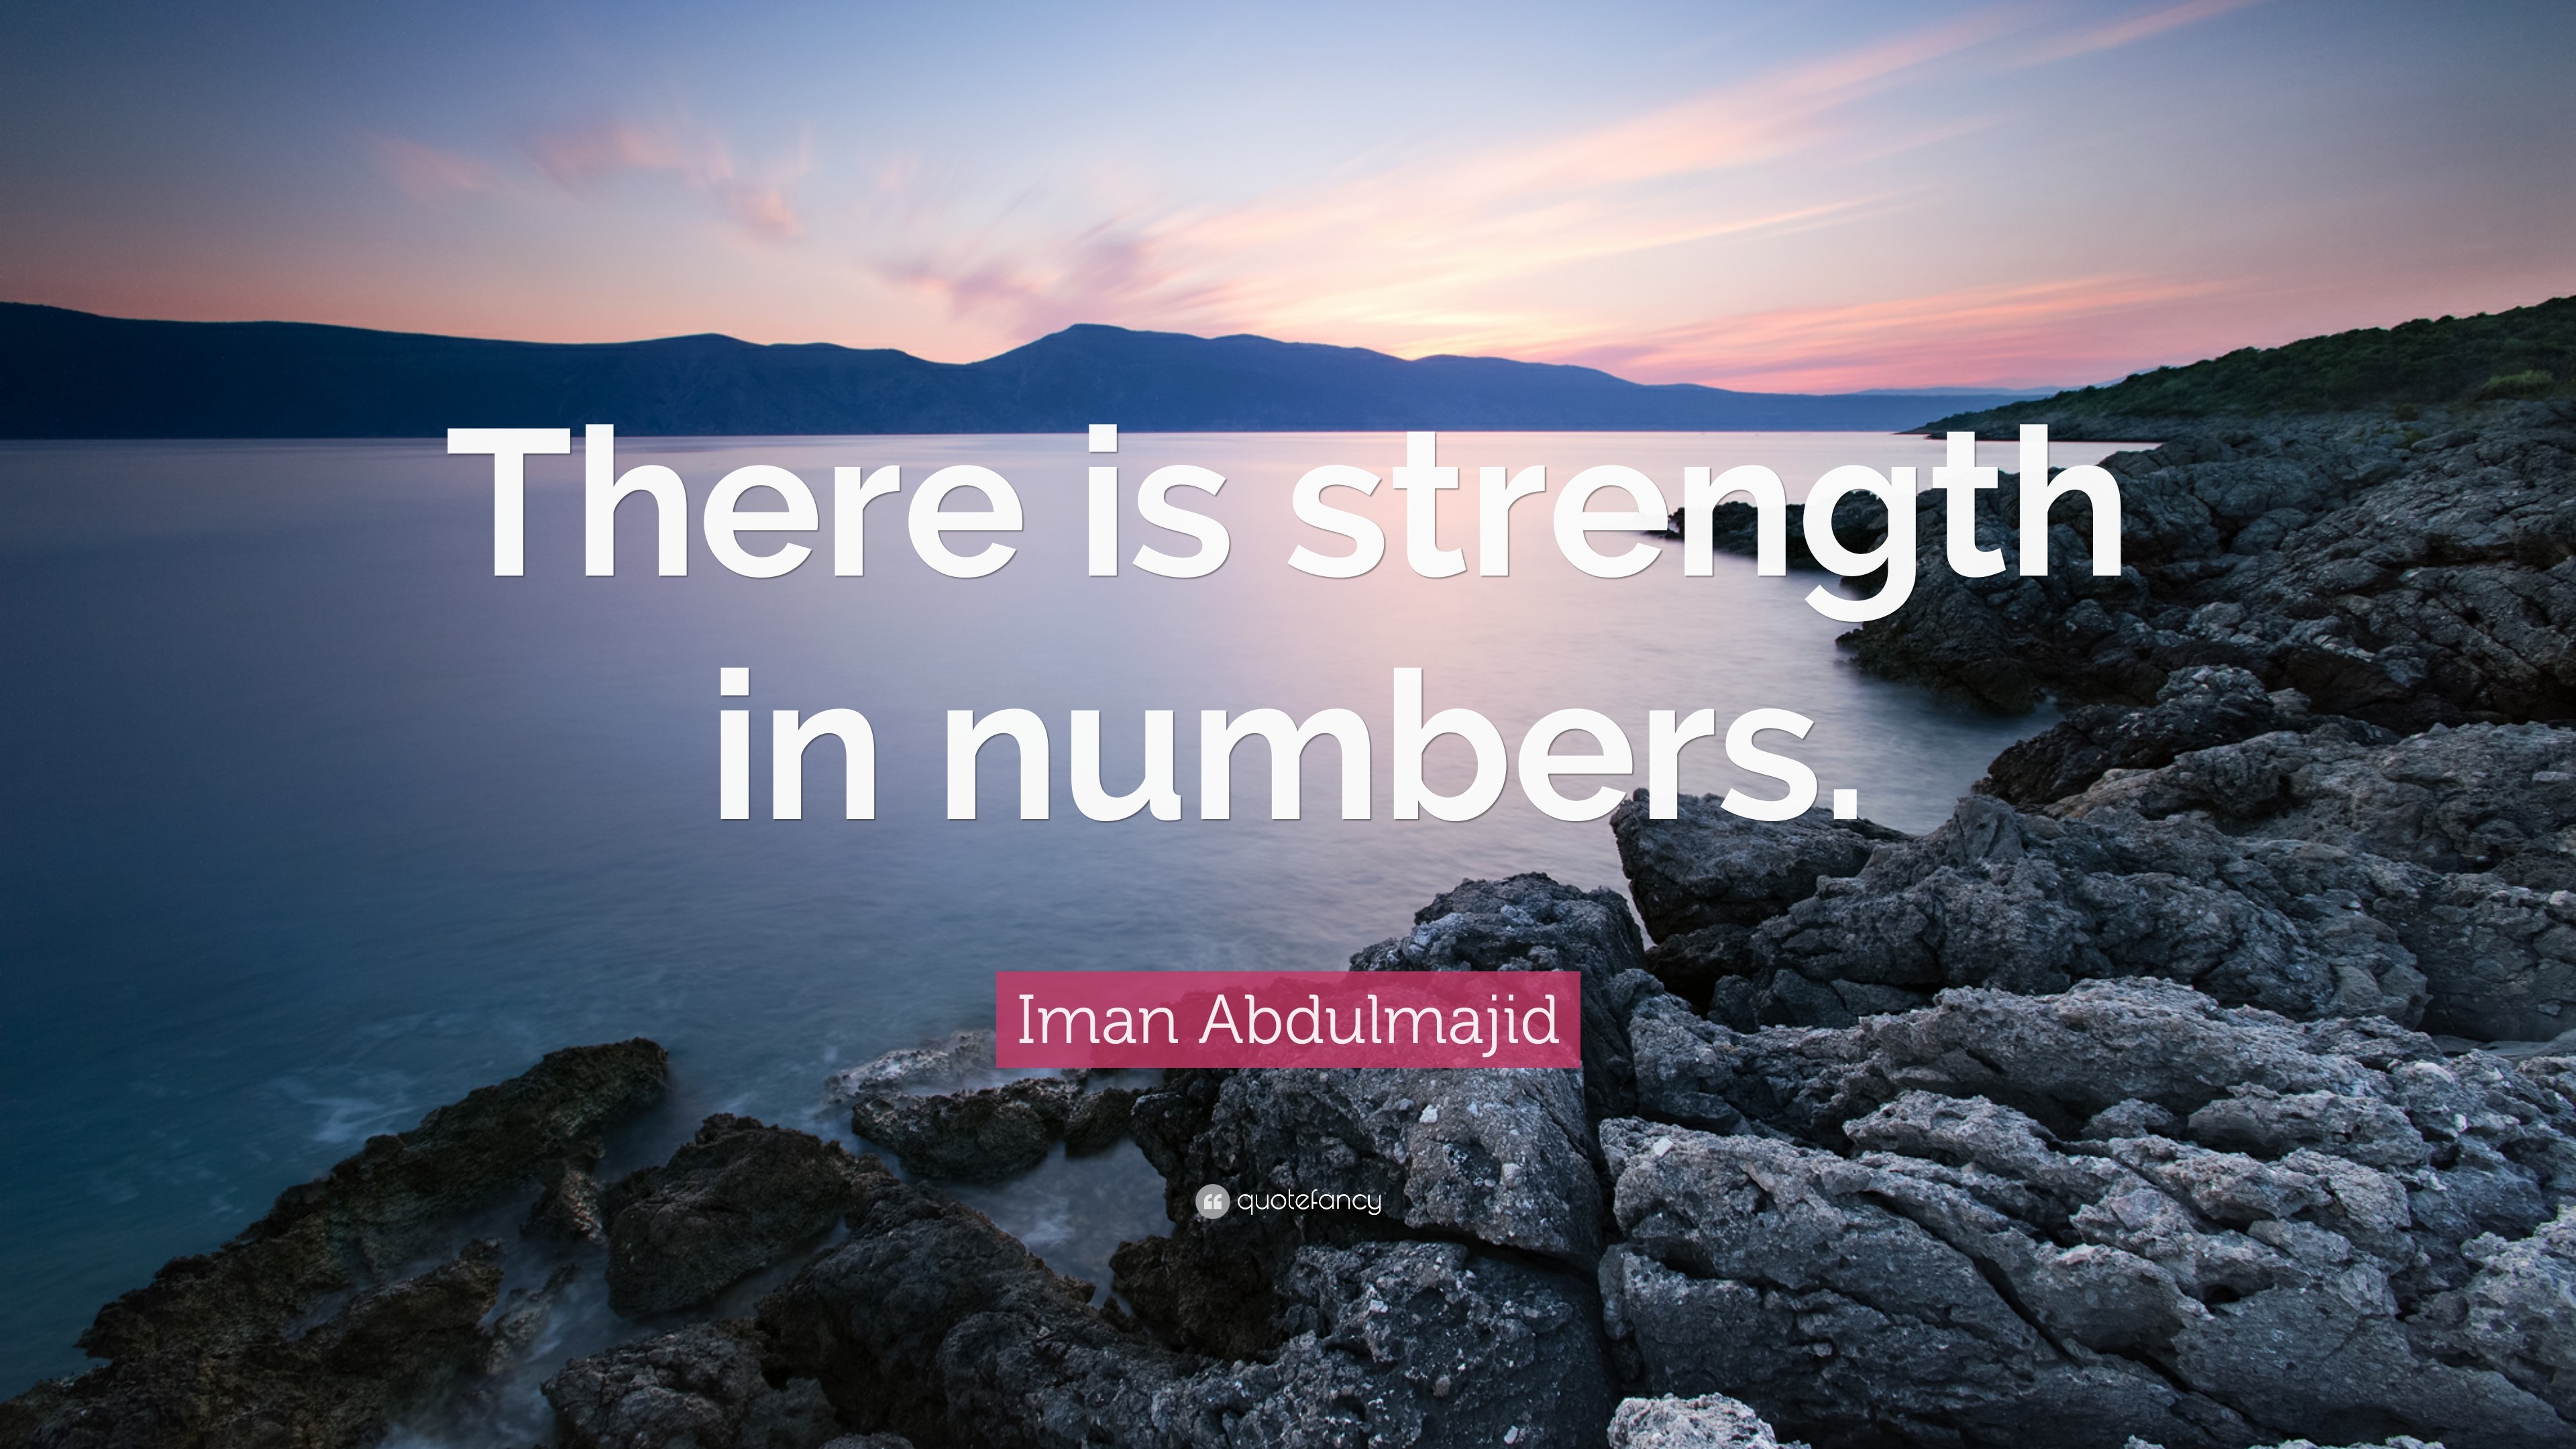 3840x2160 Iman Abdulmajid Quote: “There is strength in numbers.”